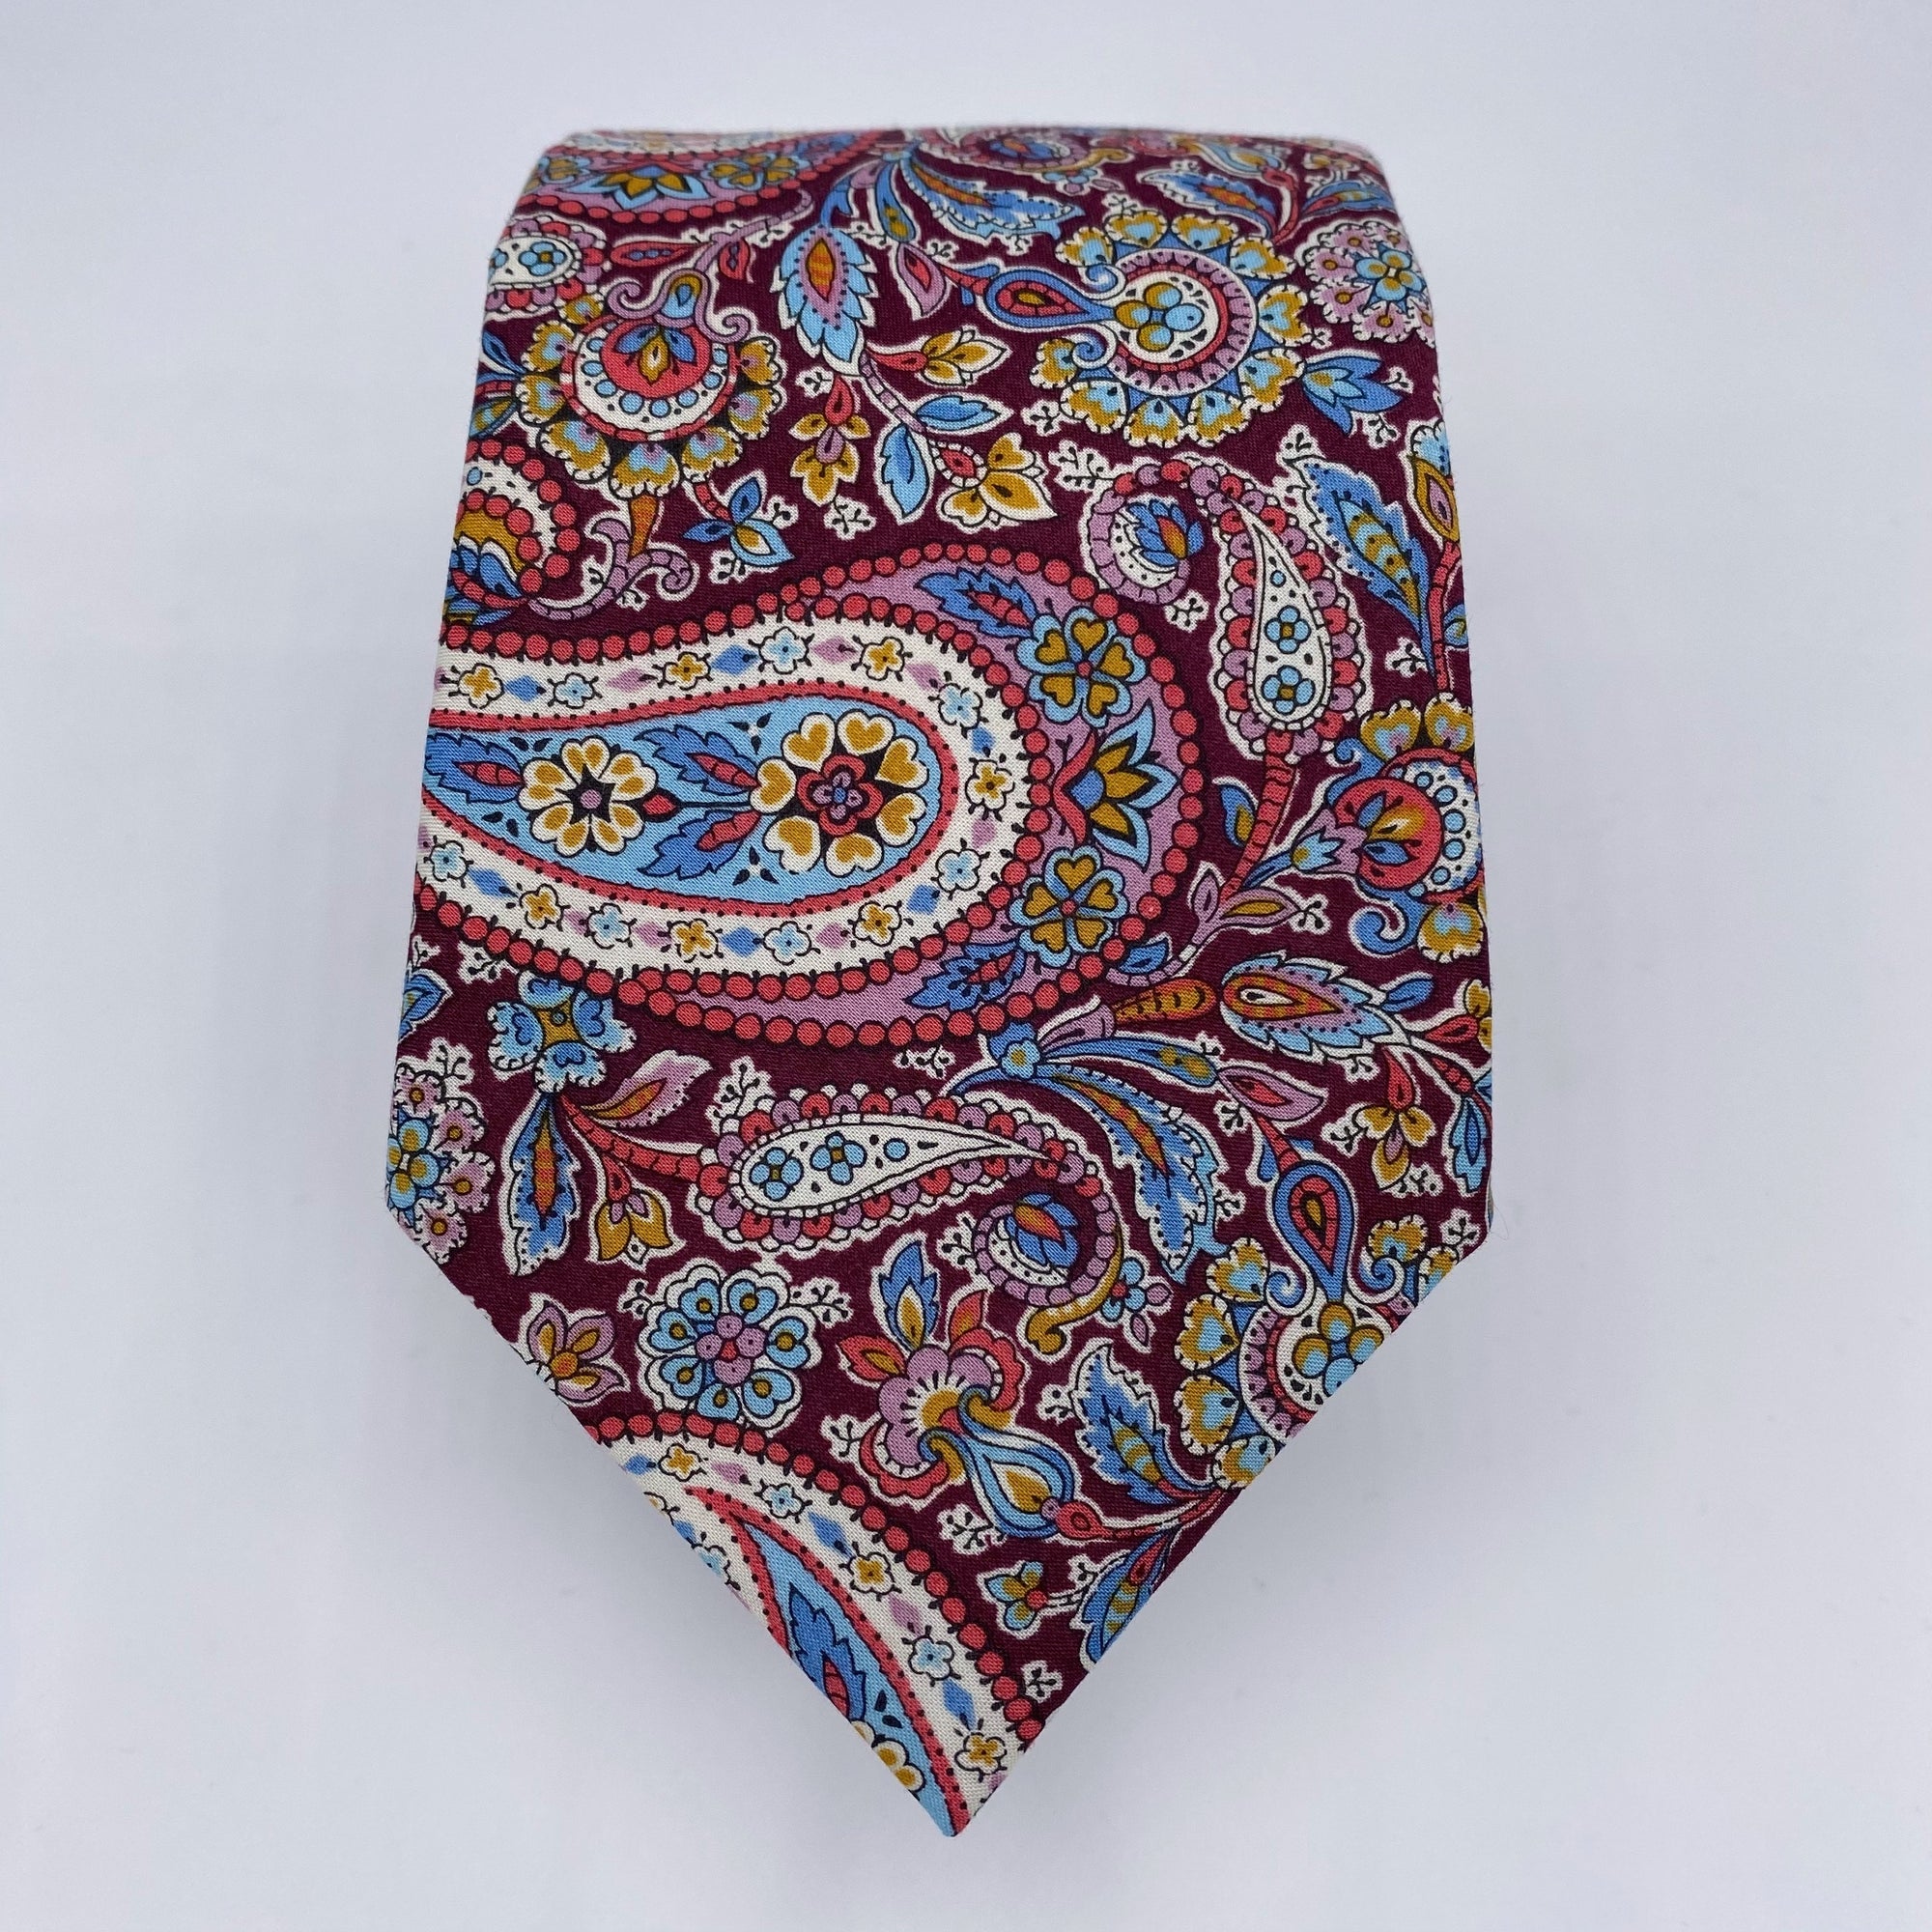 Liberty of London Necktie in Burgundy Paisley by the Belfast Bow Company